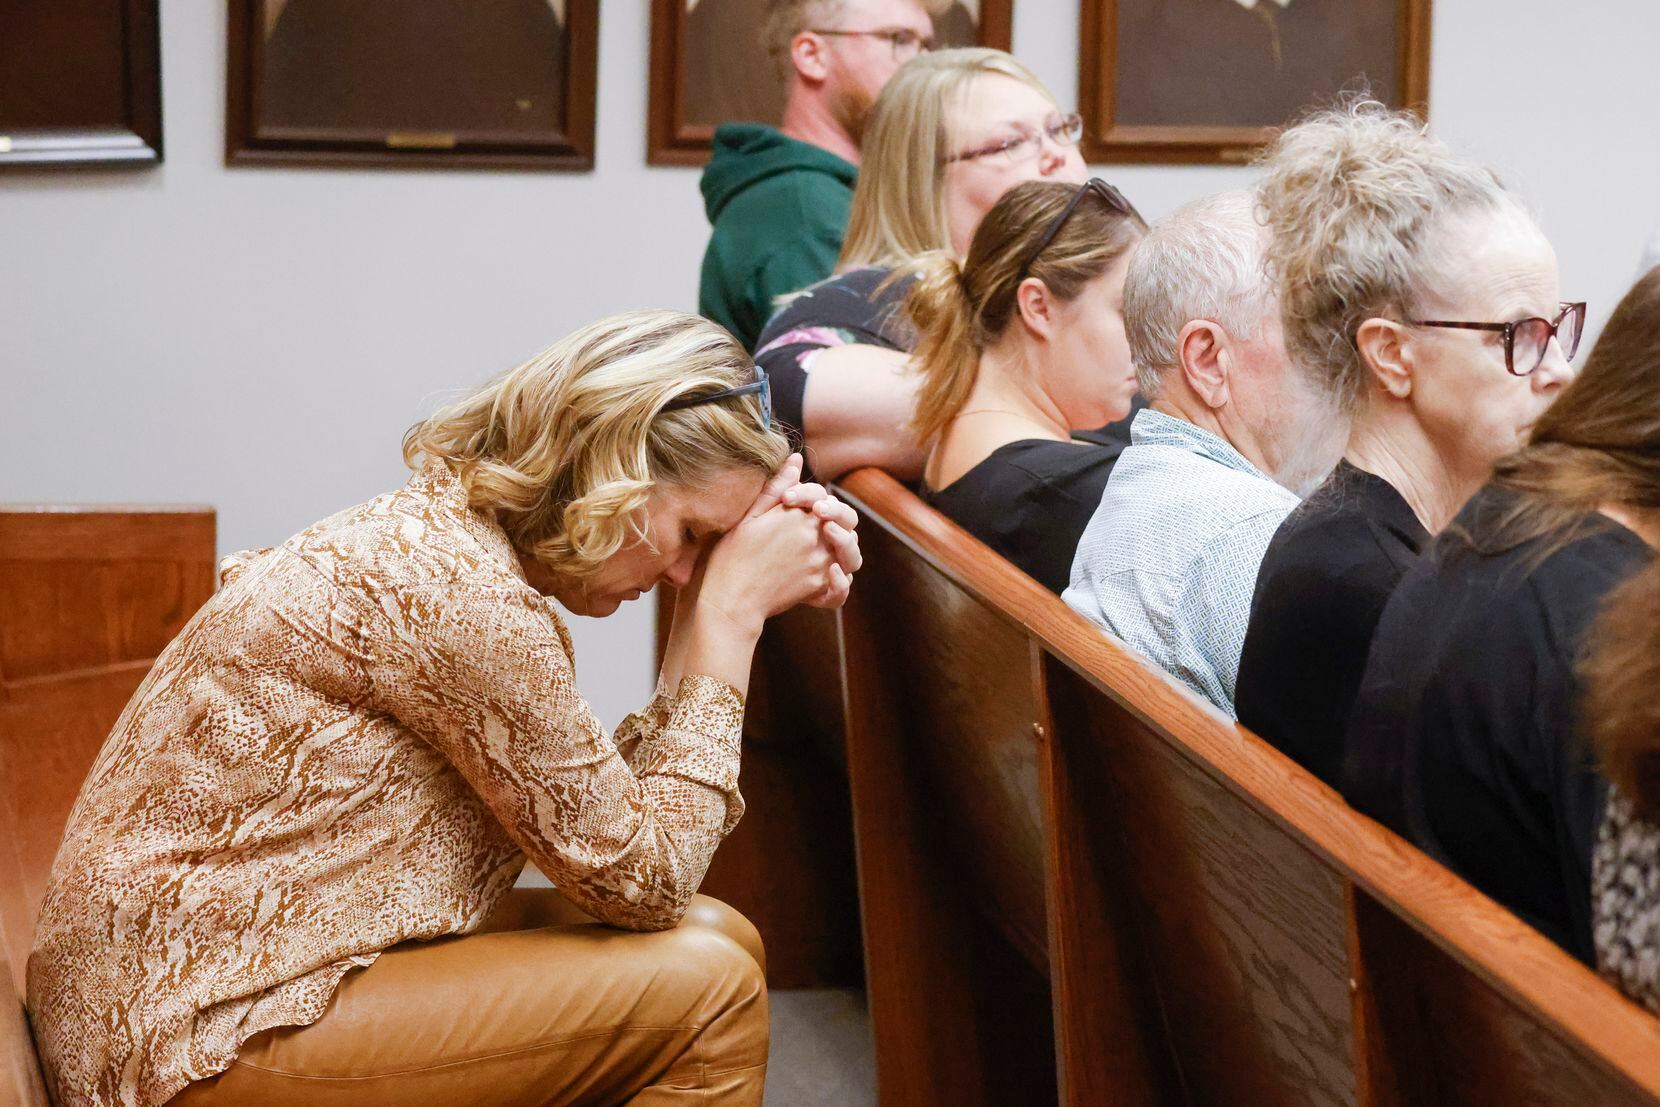 Friends and family members of deceased Jonathan Crews listen to the 911 call recording of...